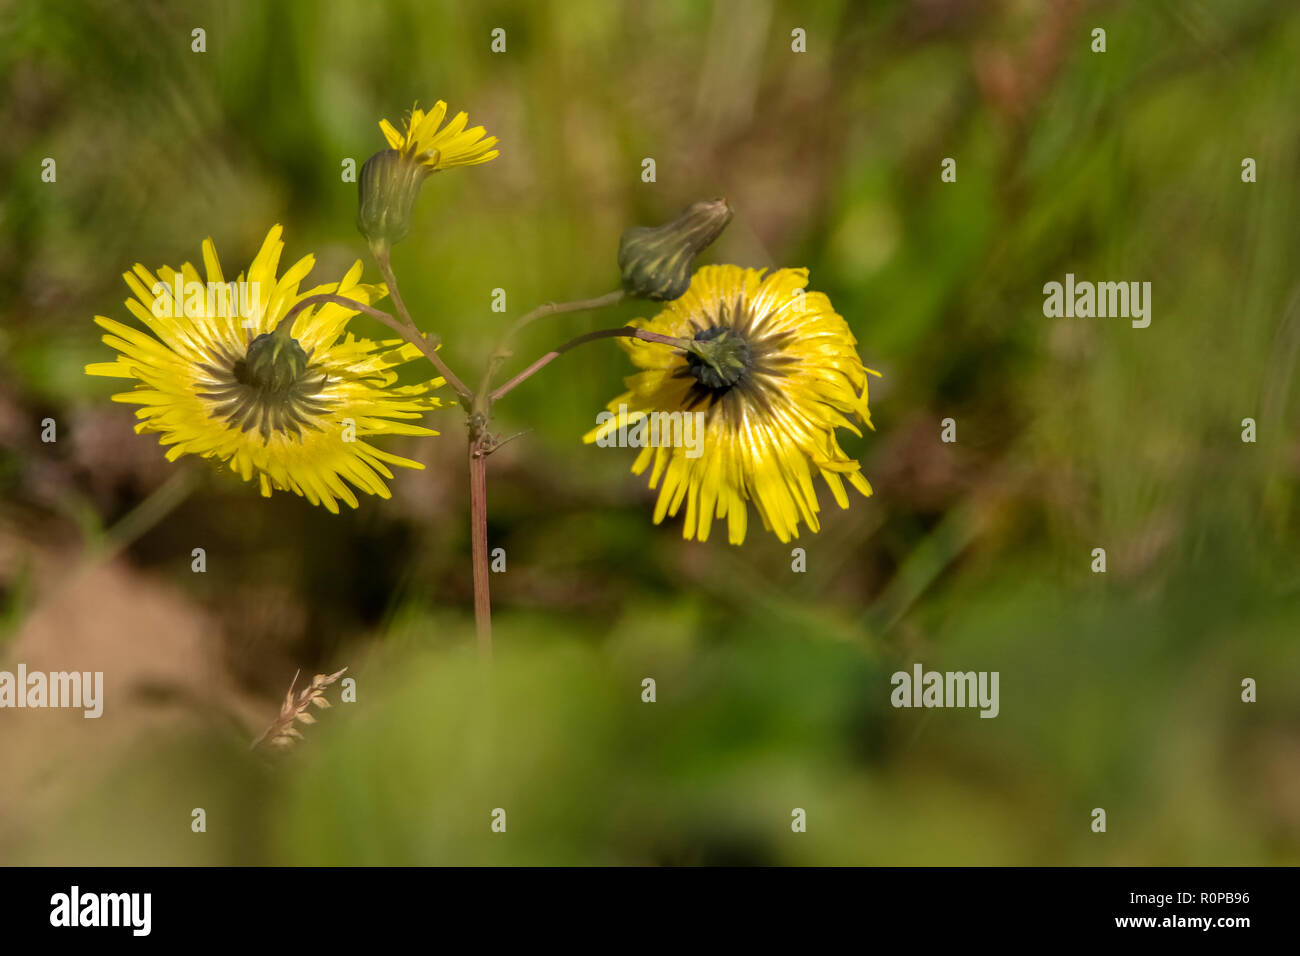 Yellow flowers. Blooming flowers. Yellow flowers on a green grass. Meadow with rural flowers. Wild nature flower. Weed on field. Stock Photo